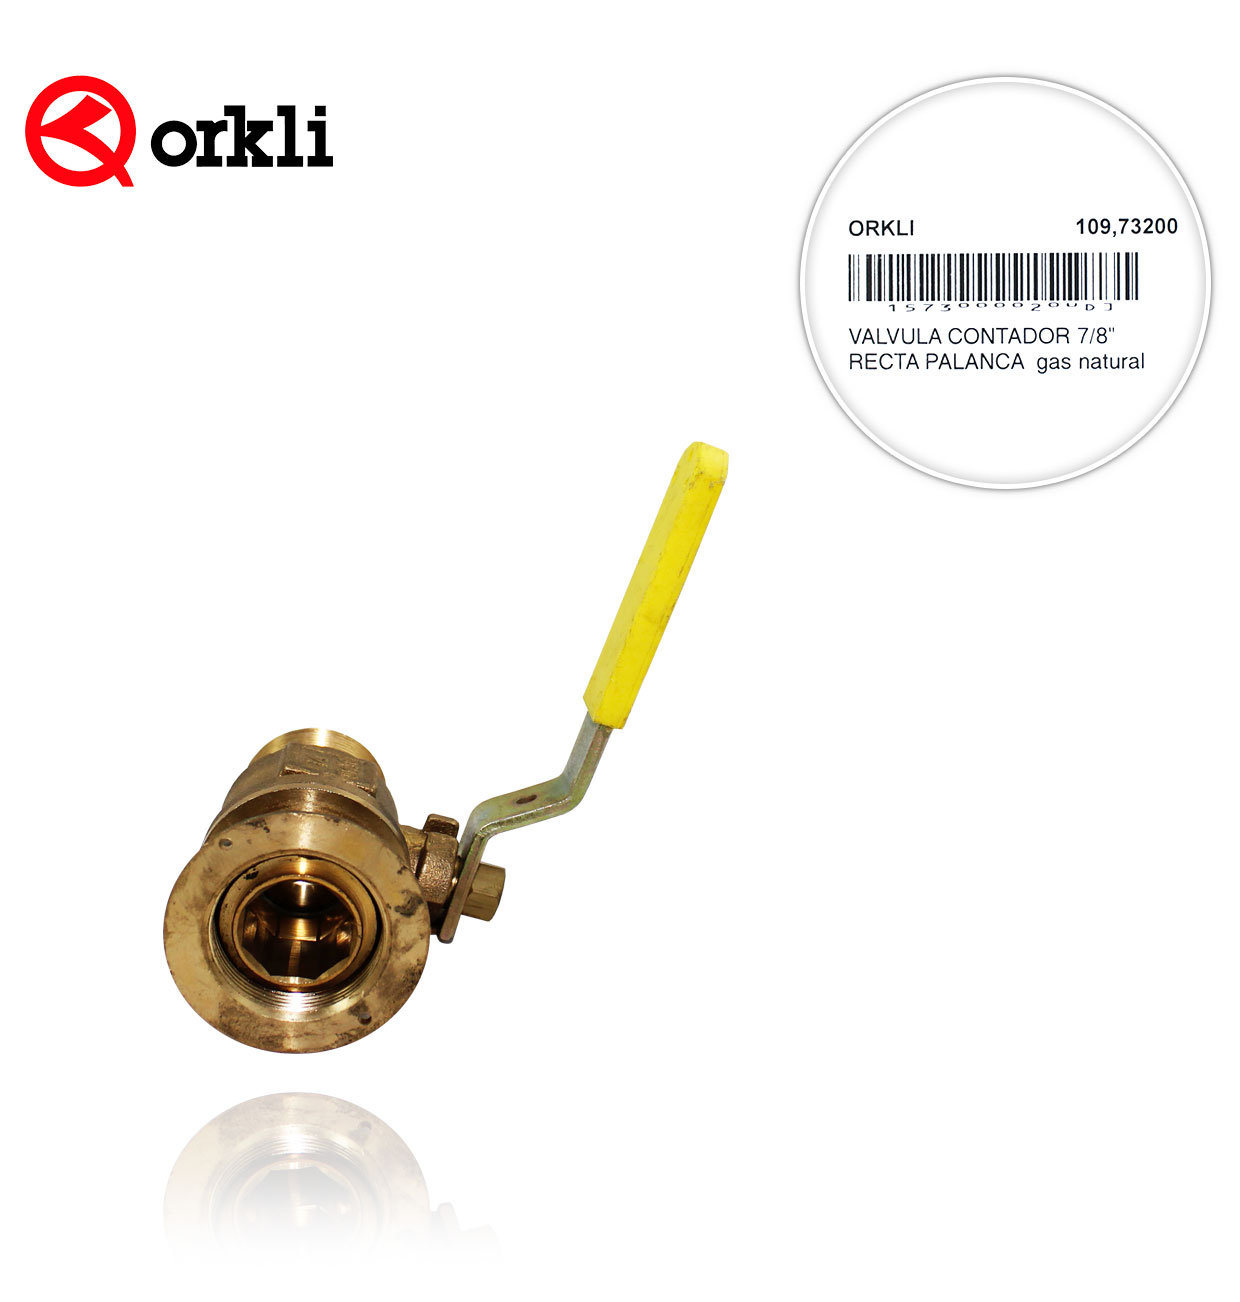 7/8" natural gas STRAIGHT LEVER METER VALVE